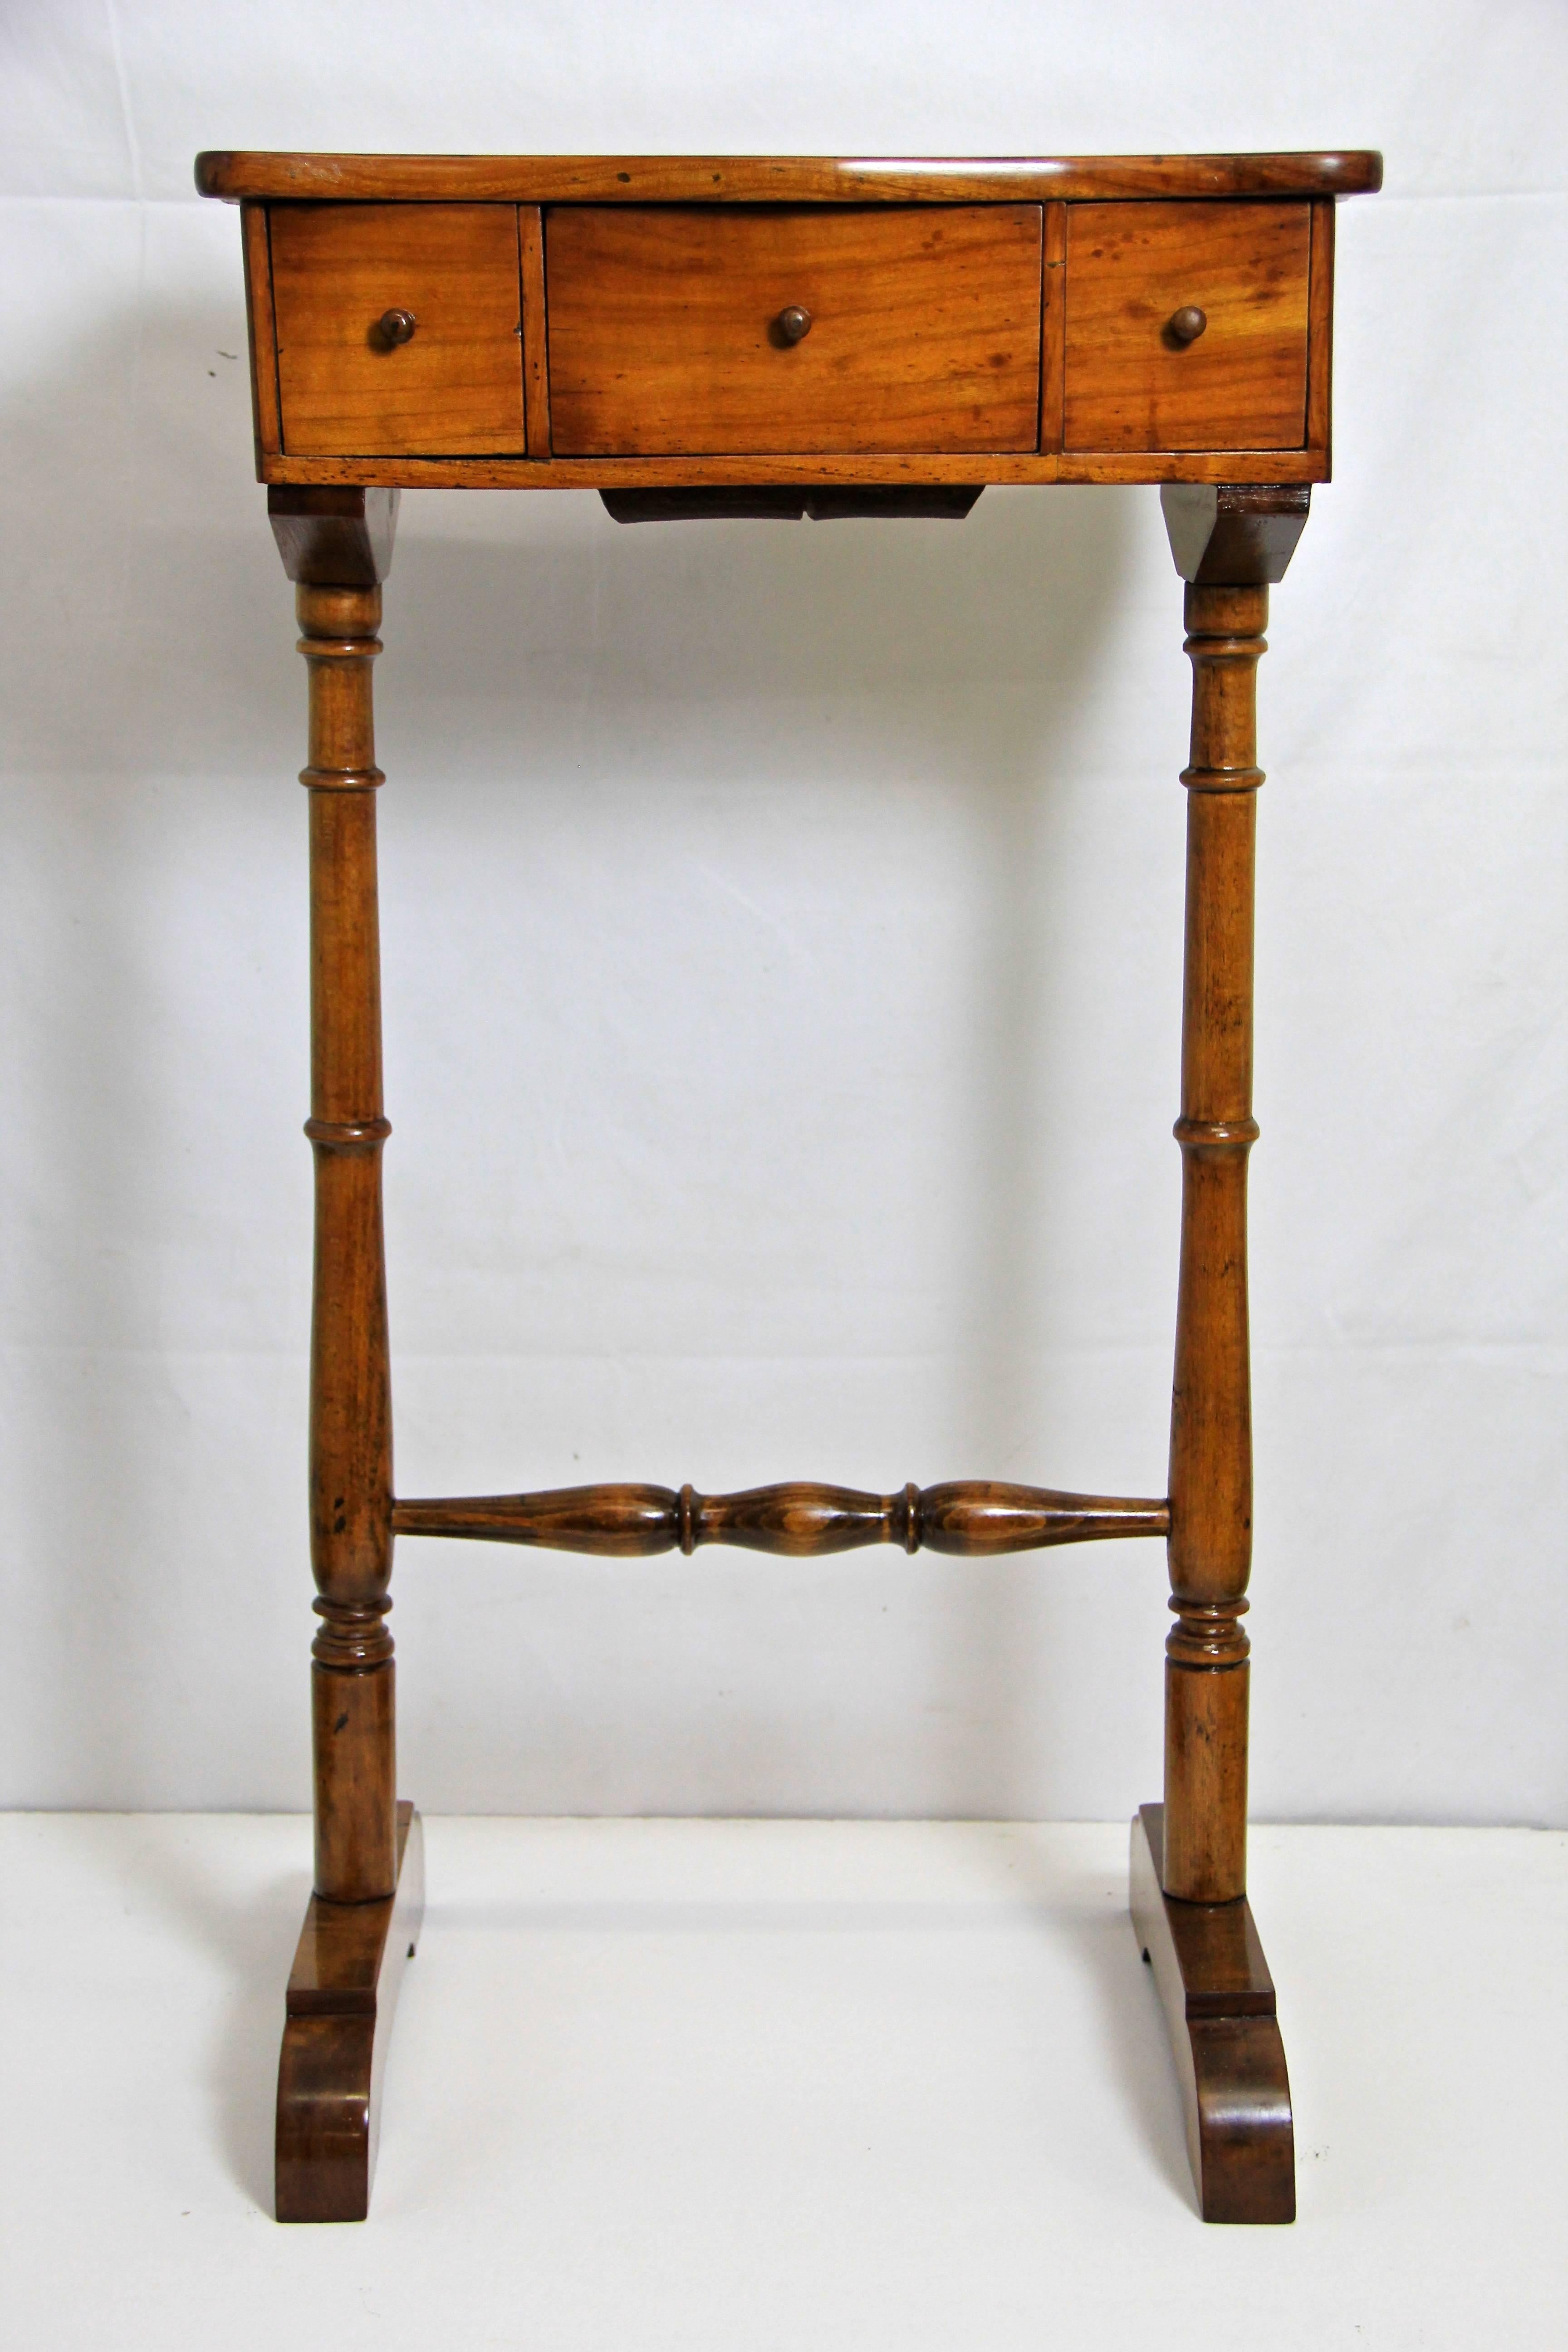 We present to you this absolute lovely Biedermeier sewing side table coming from the Austrian Biedermeier era around 1850. After 166 years this small table is still an eye-catcher. With two small drawers and a bigger center drawer this side table